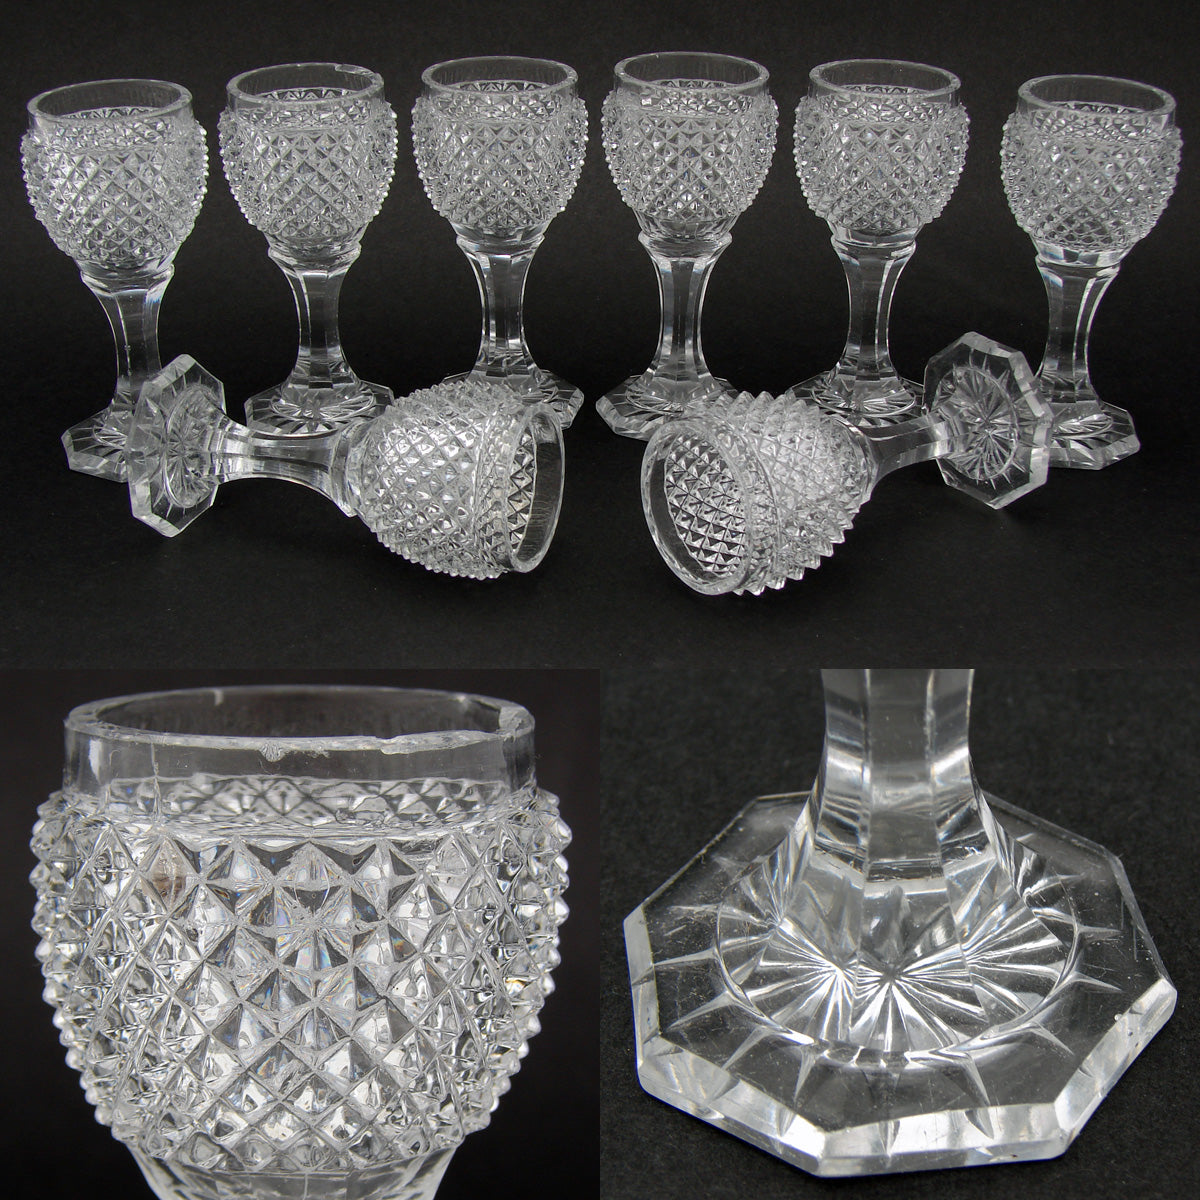 Antique French Baccarat 12oz Decanter PAIR, 8 Cordial Goblets, c1830 Diam Cut Crystal